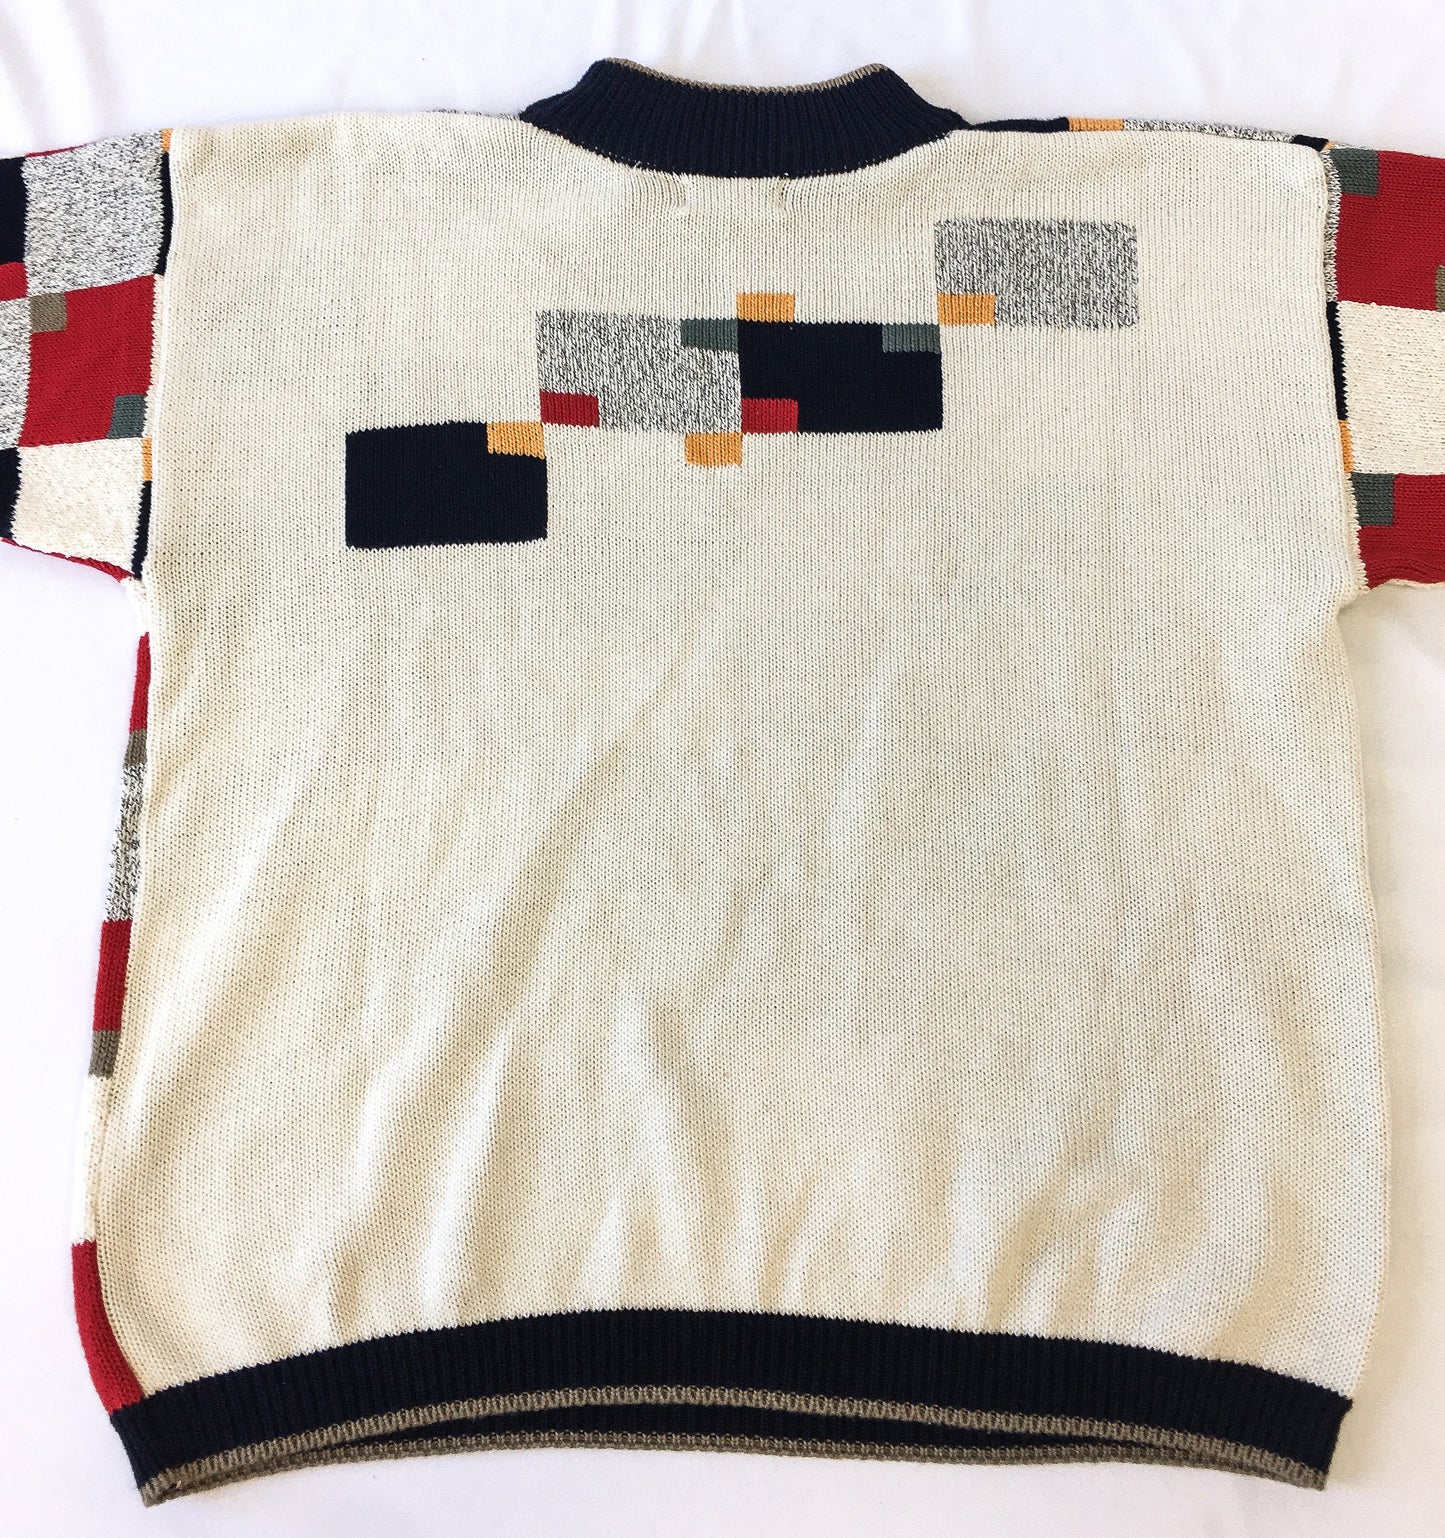 Vintage 90s Jeanne Pierre Red and Cream Geometric Patterned Sweater, Men's Sz. M, Vintage Grandpa Sweater